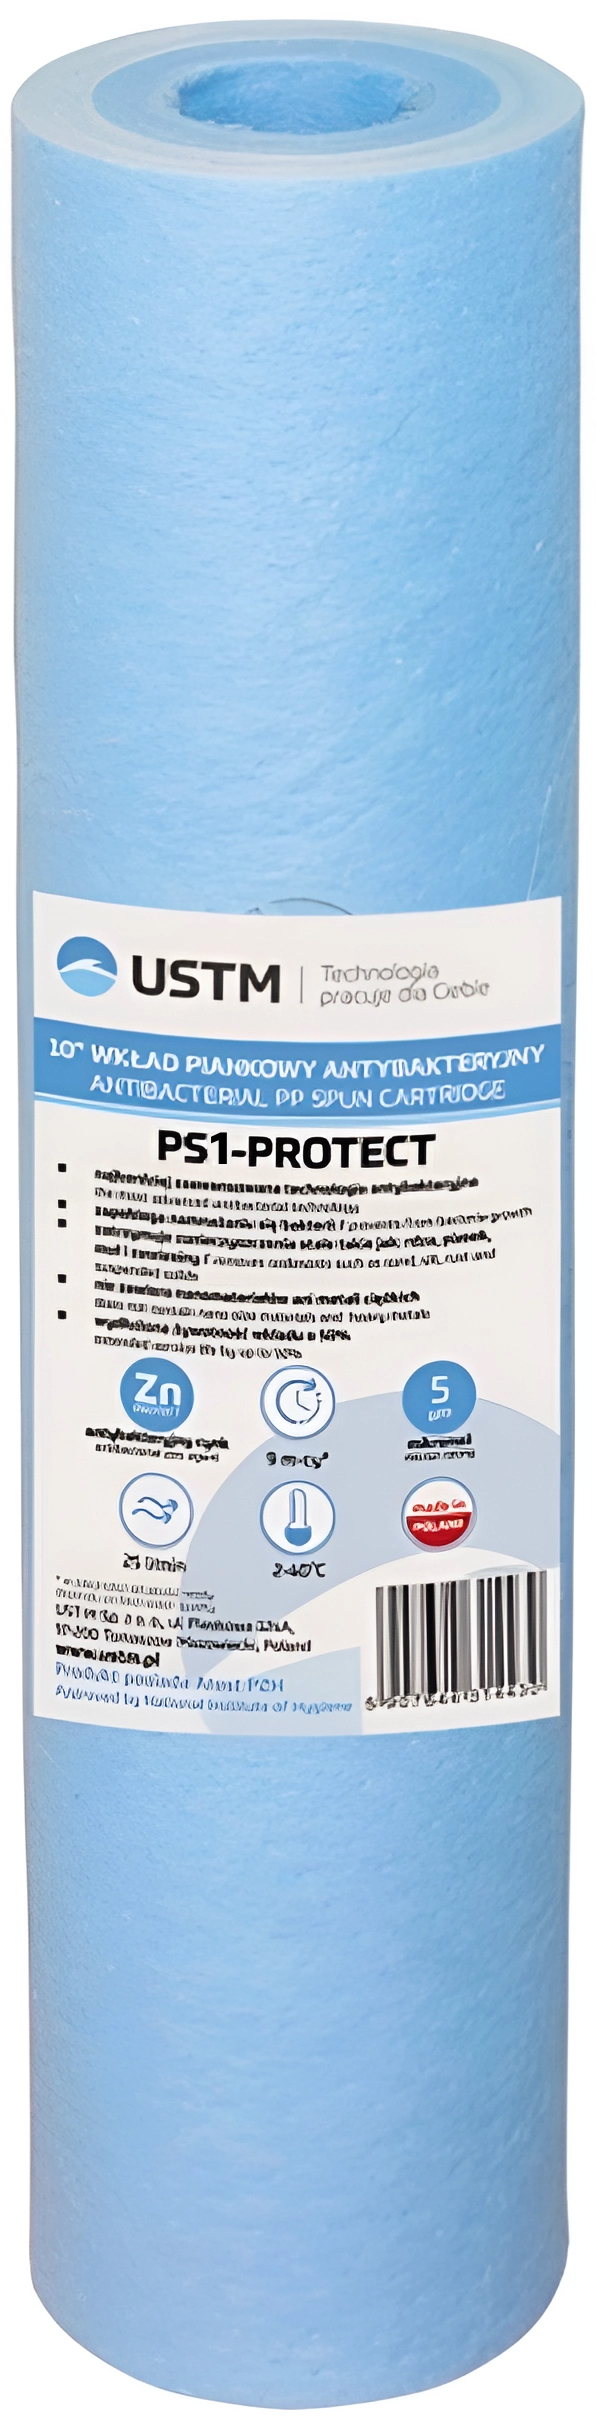 USTM PS-1-Protect 10"